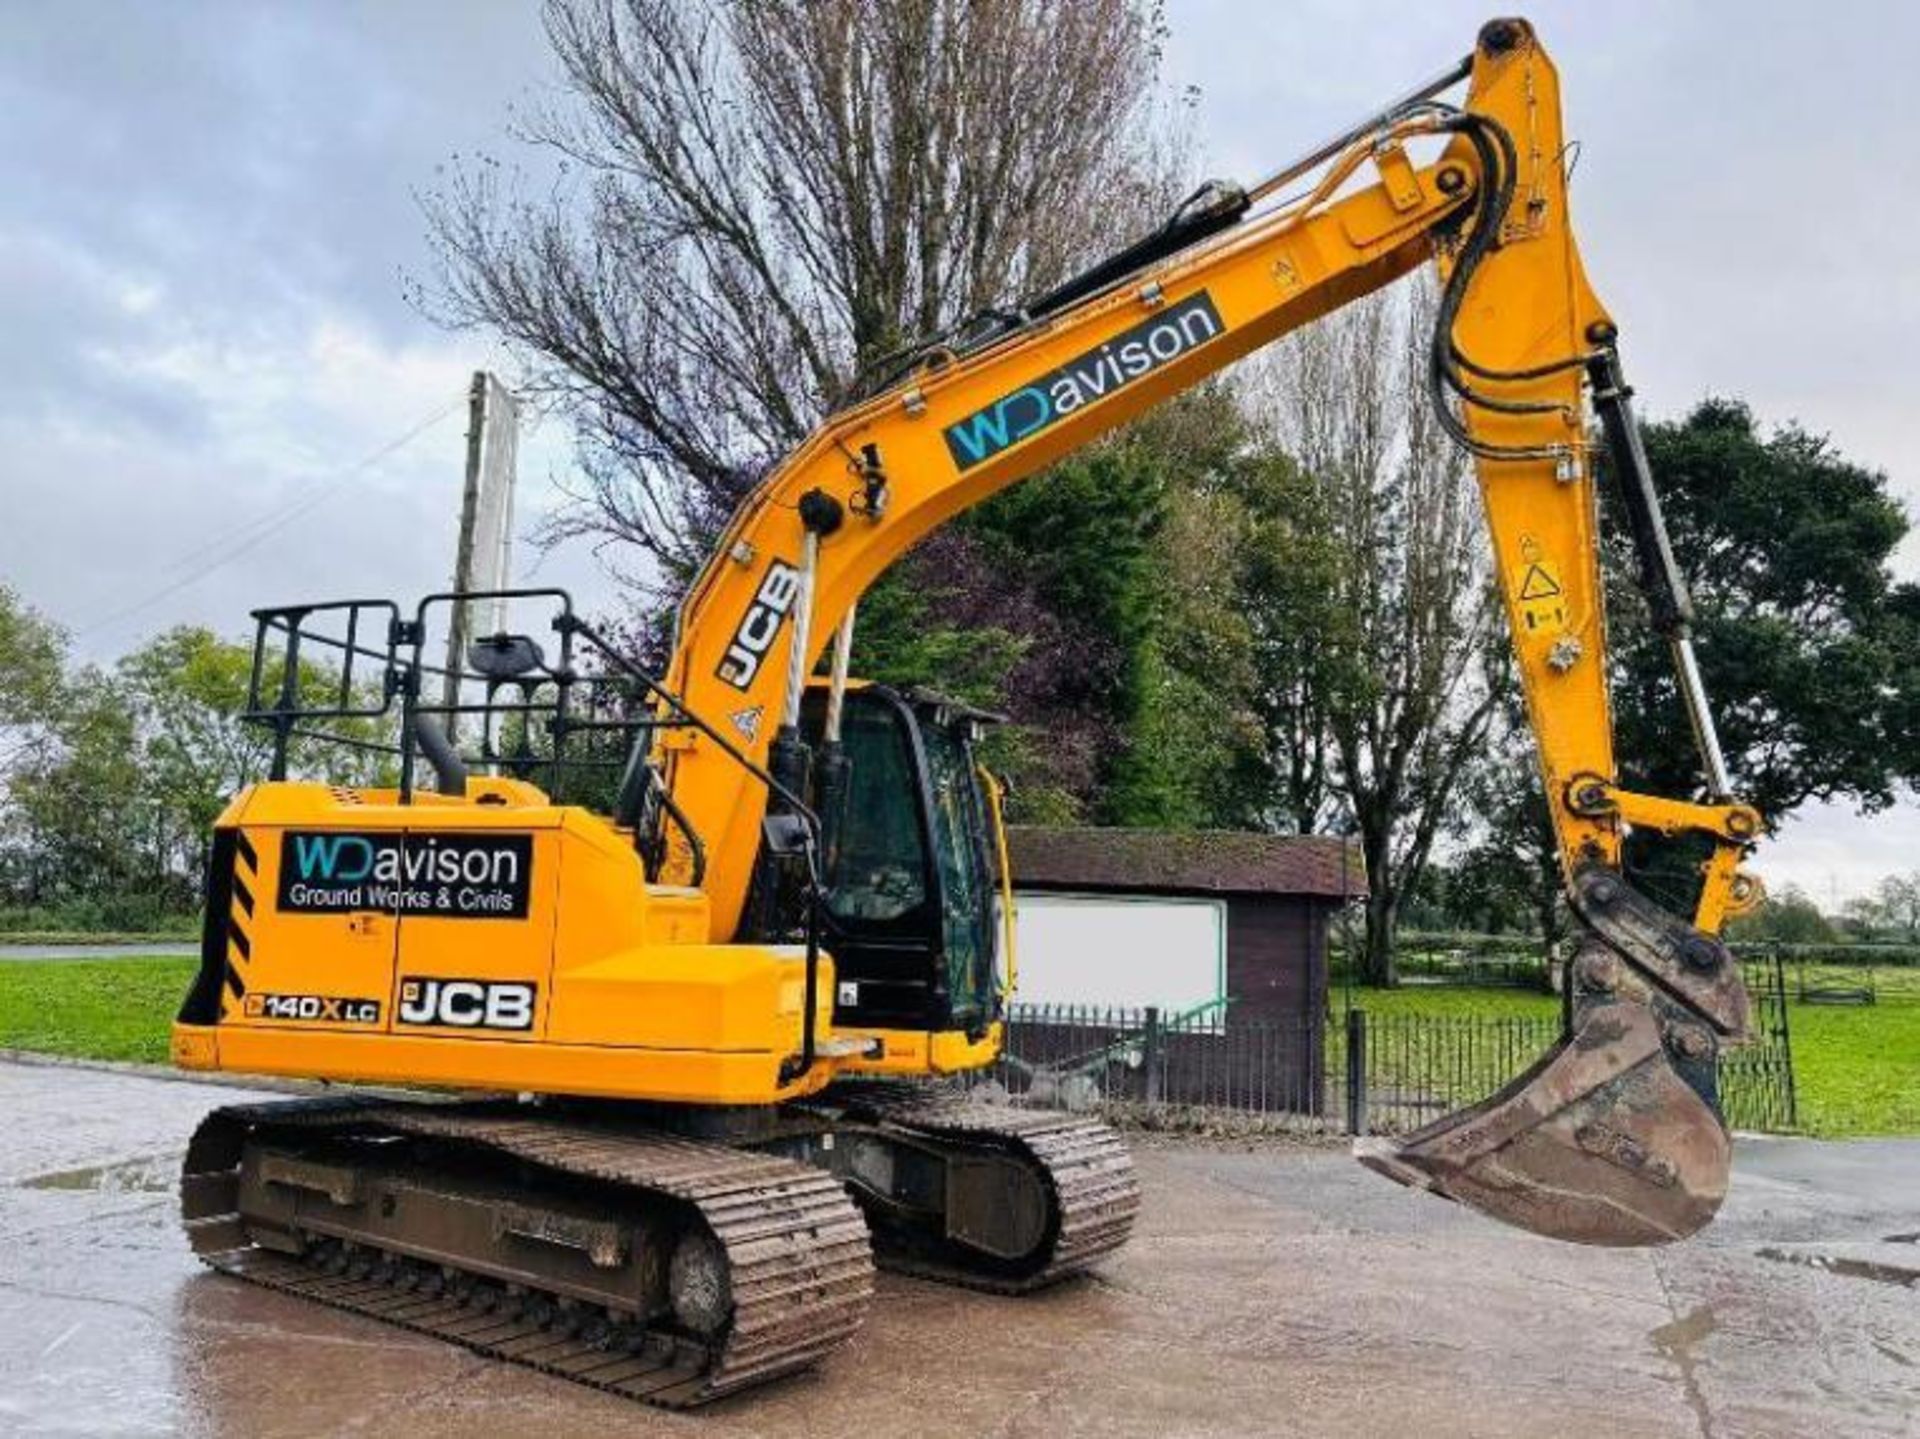 JCB 140XLC TRACKED EXCAVATOR *YEAR 2020, 3186 HOURS* C/W QUICK HITCH 